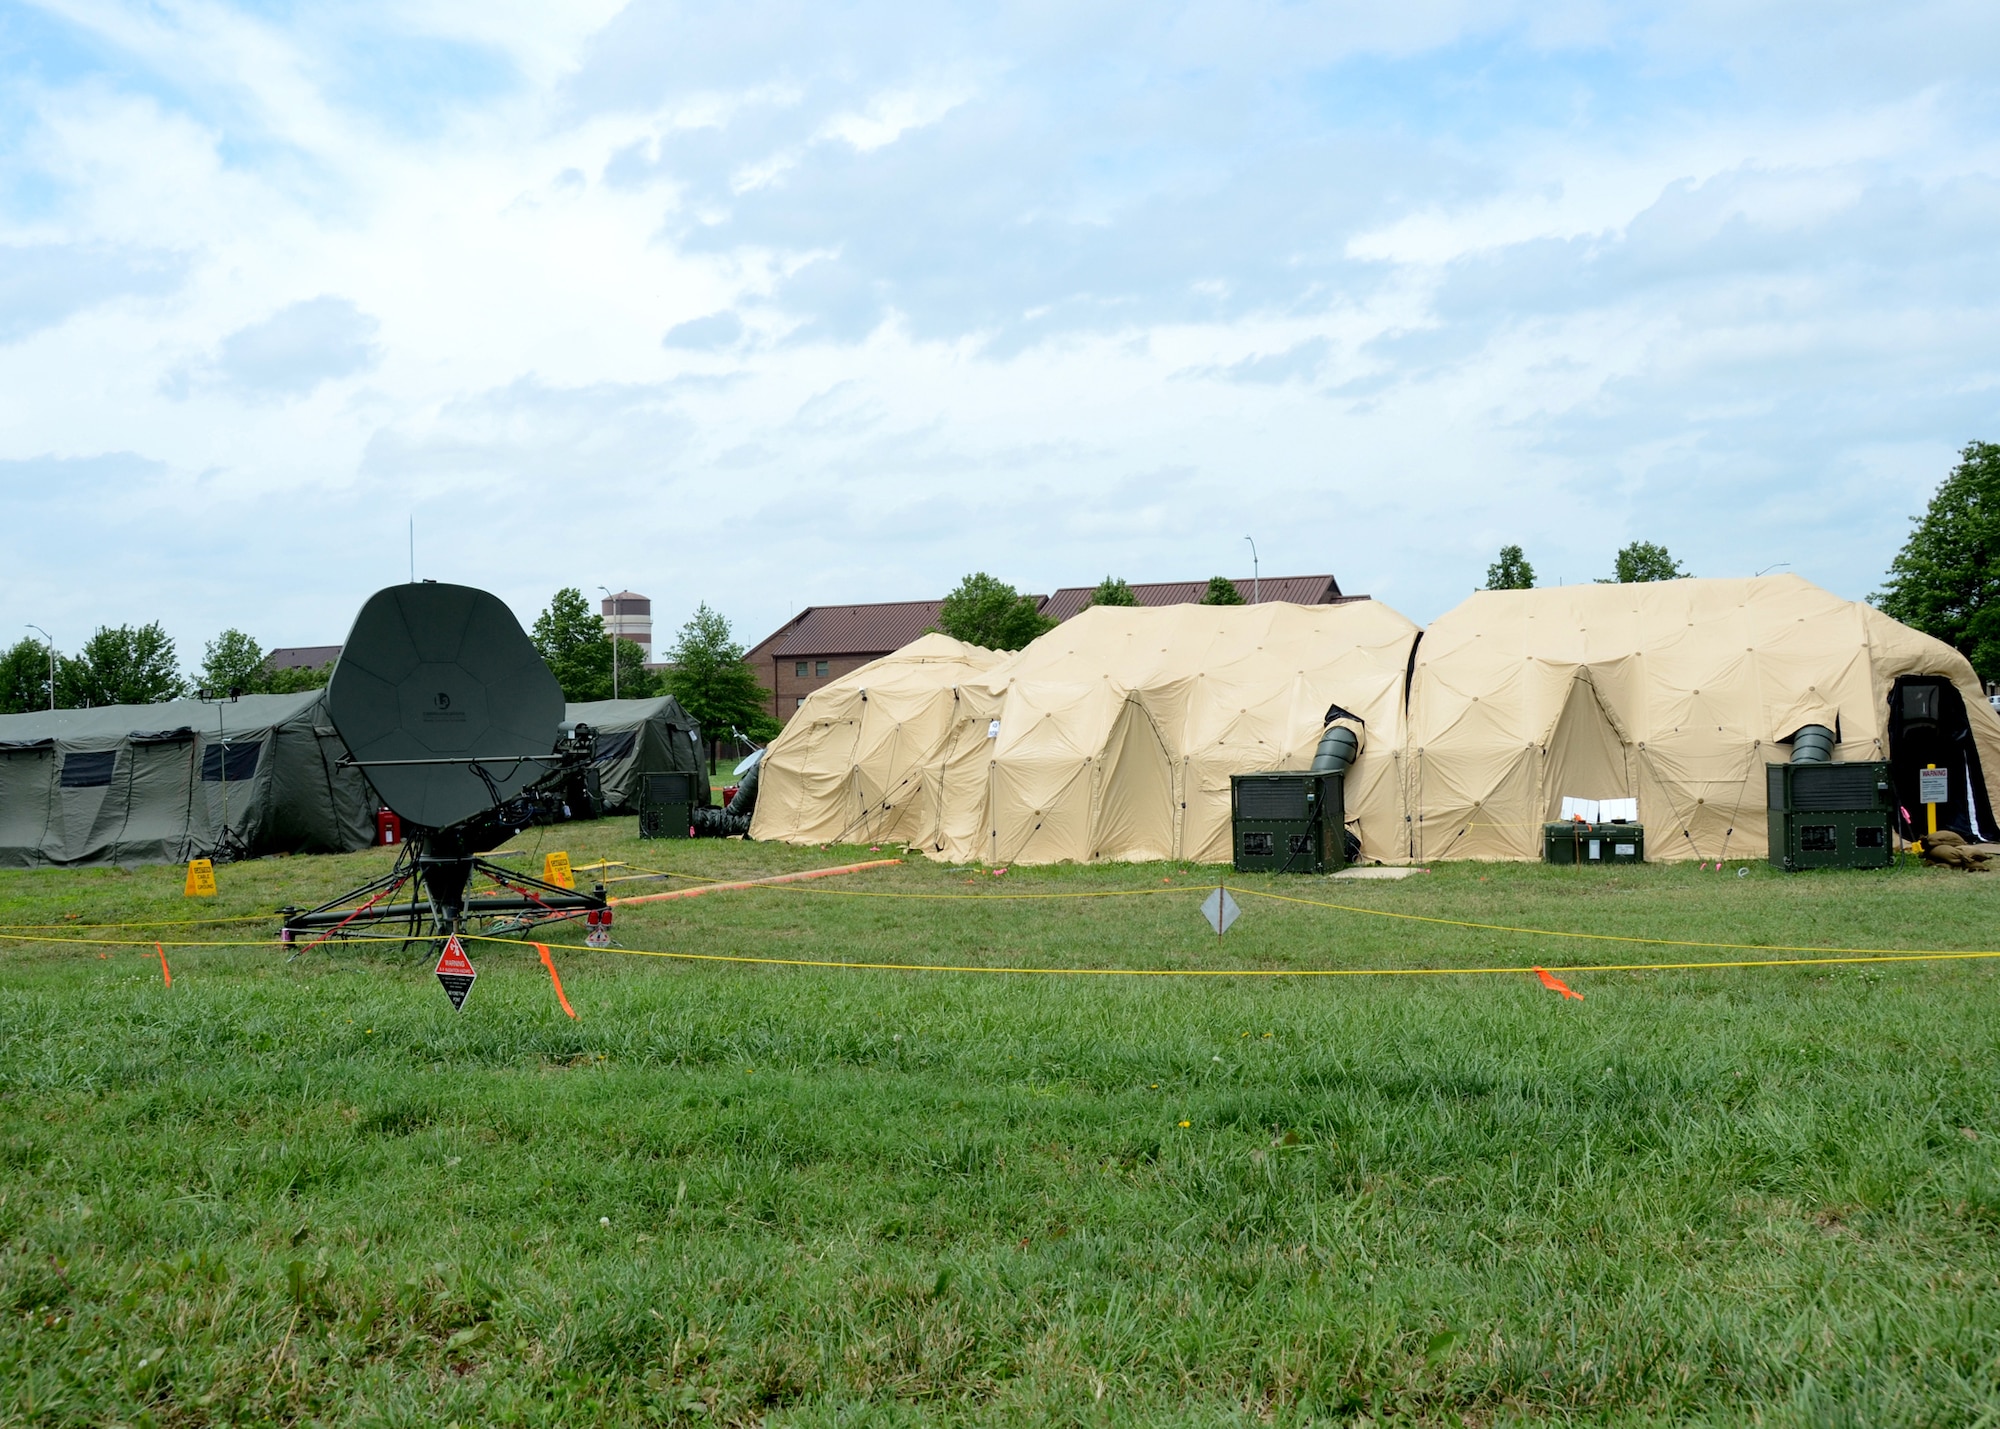 The 239th Combat Communications Squadron, Missouri Air National Guard, “deployed” from Jefferson Barracks, St. Louis, Missouri, to Whiteman Air Force Base, Missouri, for an exercise during the 131st Bomb Wing annual training week, June 16-20, 2014.  They set up tents and employed their mobile communications equipment for a "real-world" experience for all involved in the exercise.. (U.S. Air National Guard photo by Airman Halley Burgess)